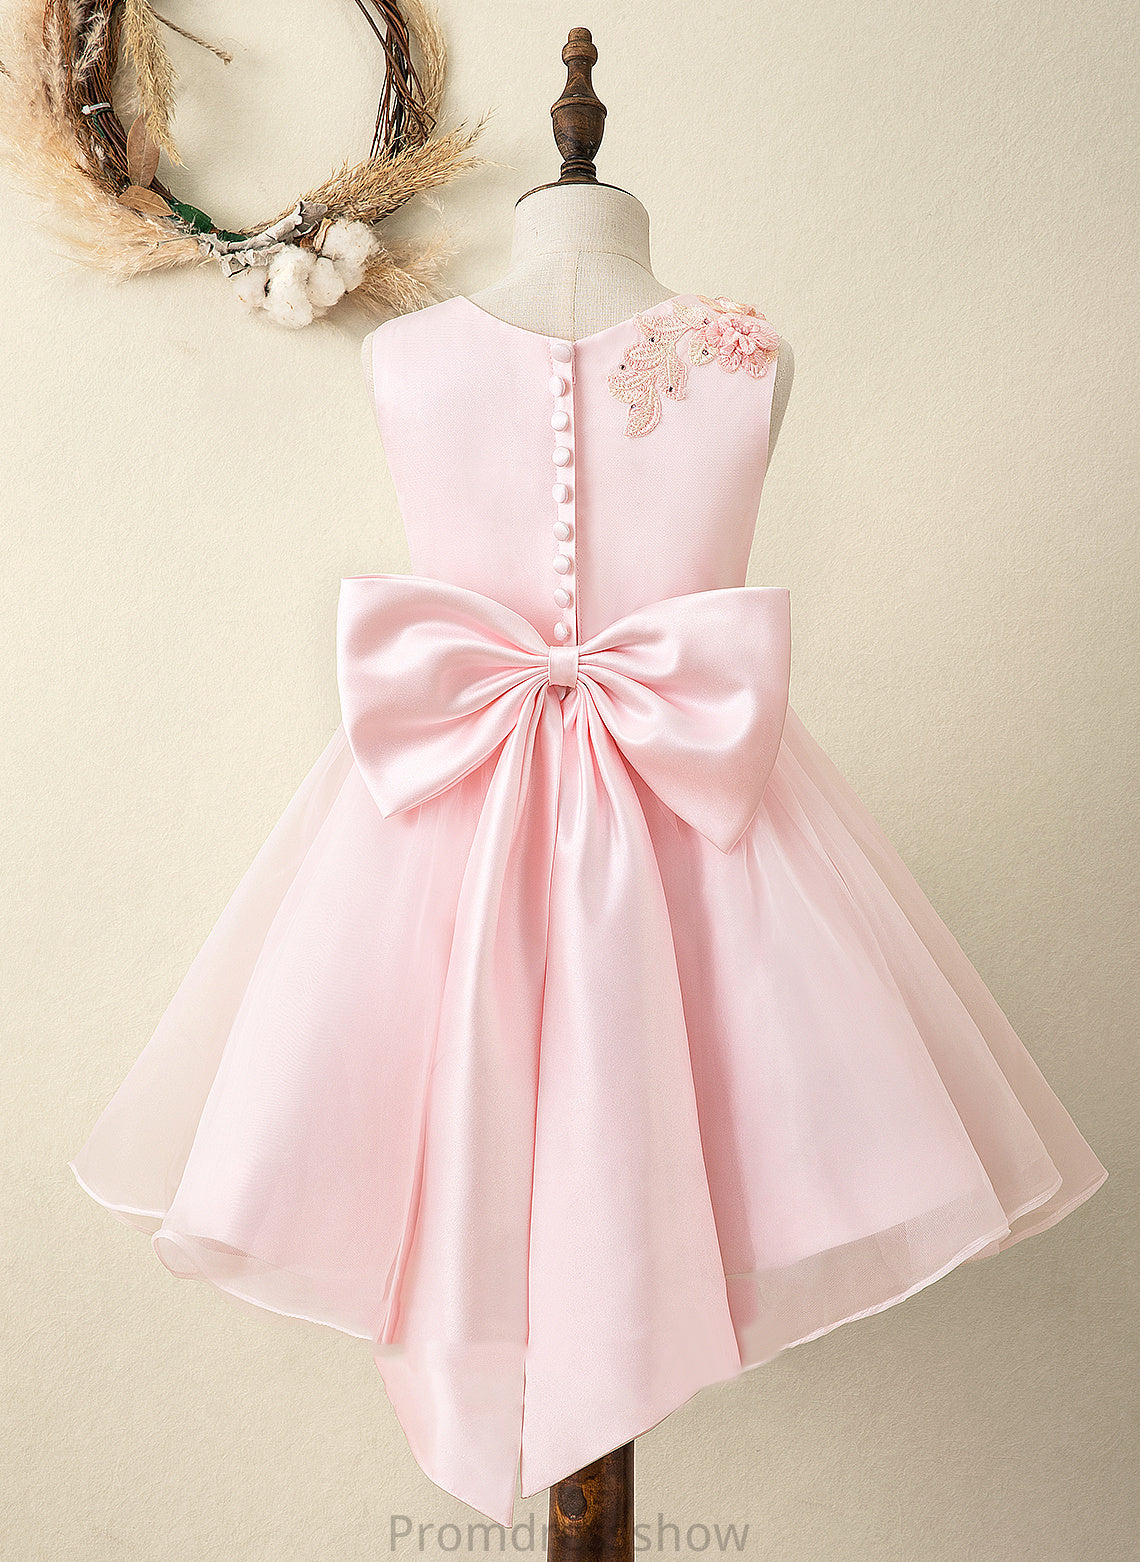 Girl Sash/Flower(s)/Bow(s) - Scoop Knee-length sash) Organza/Satin/Lace (Undetachable A-Line Summer Dress Flower Girl Dresses With Flower Neck Sleeveless